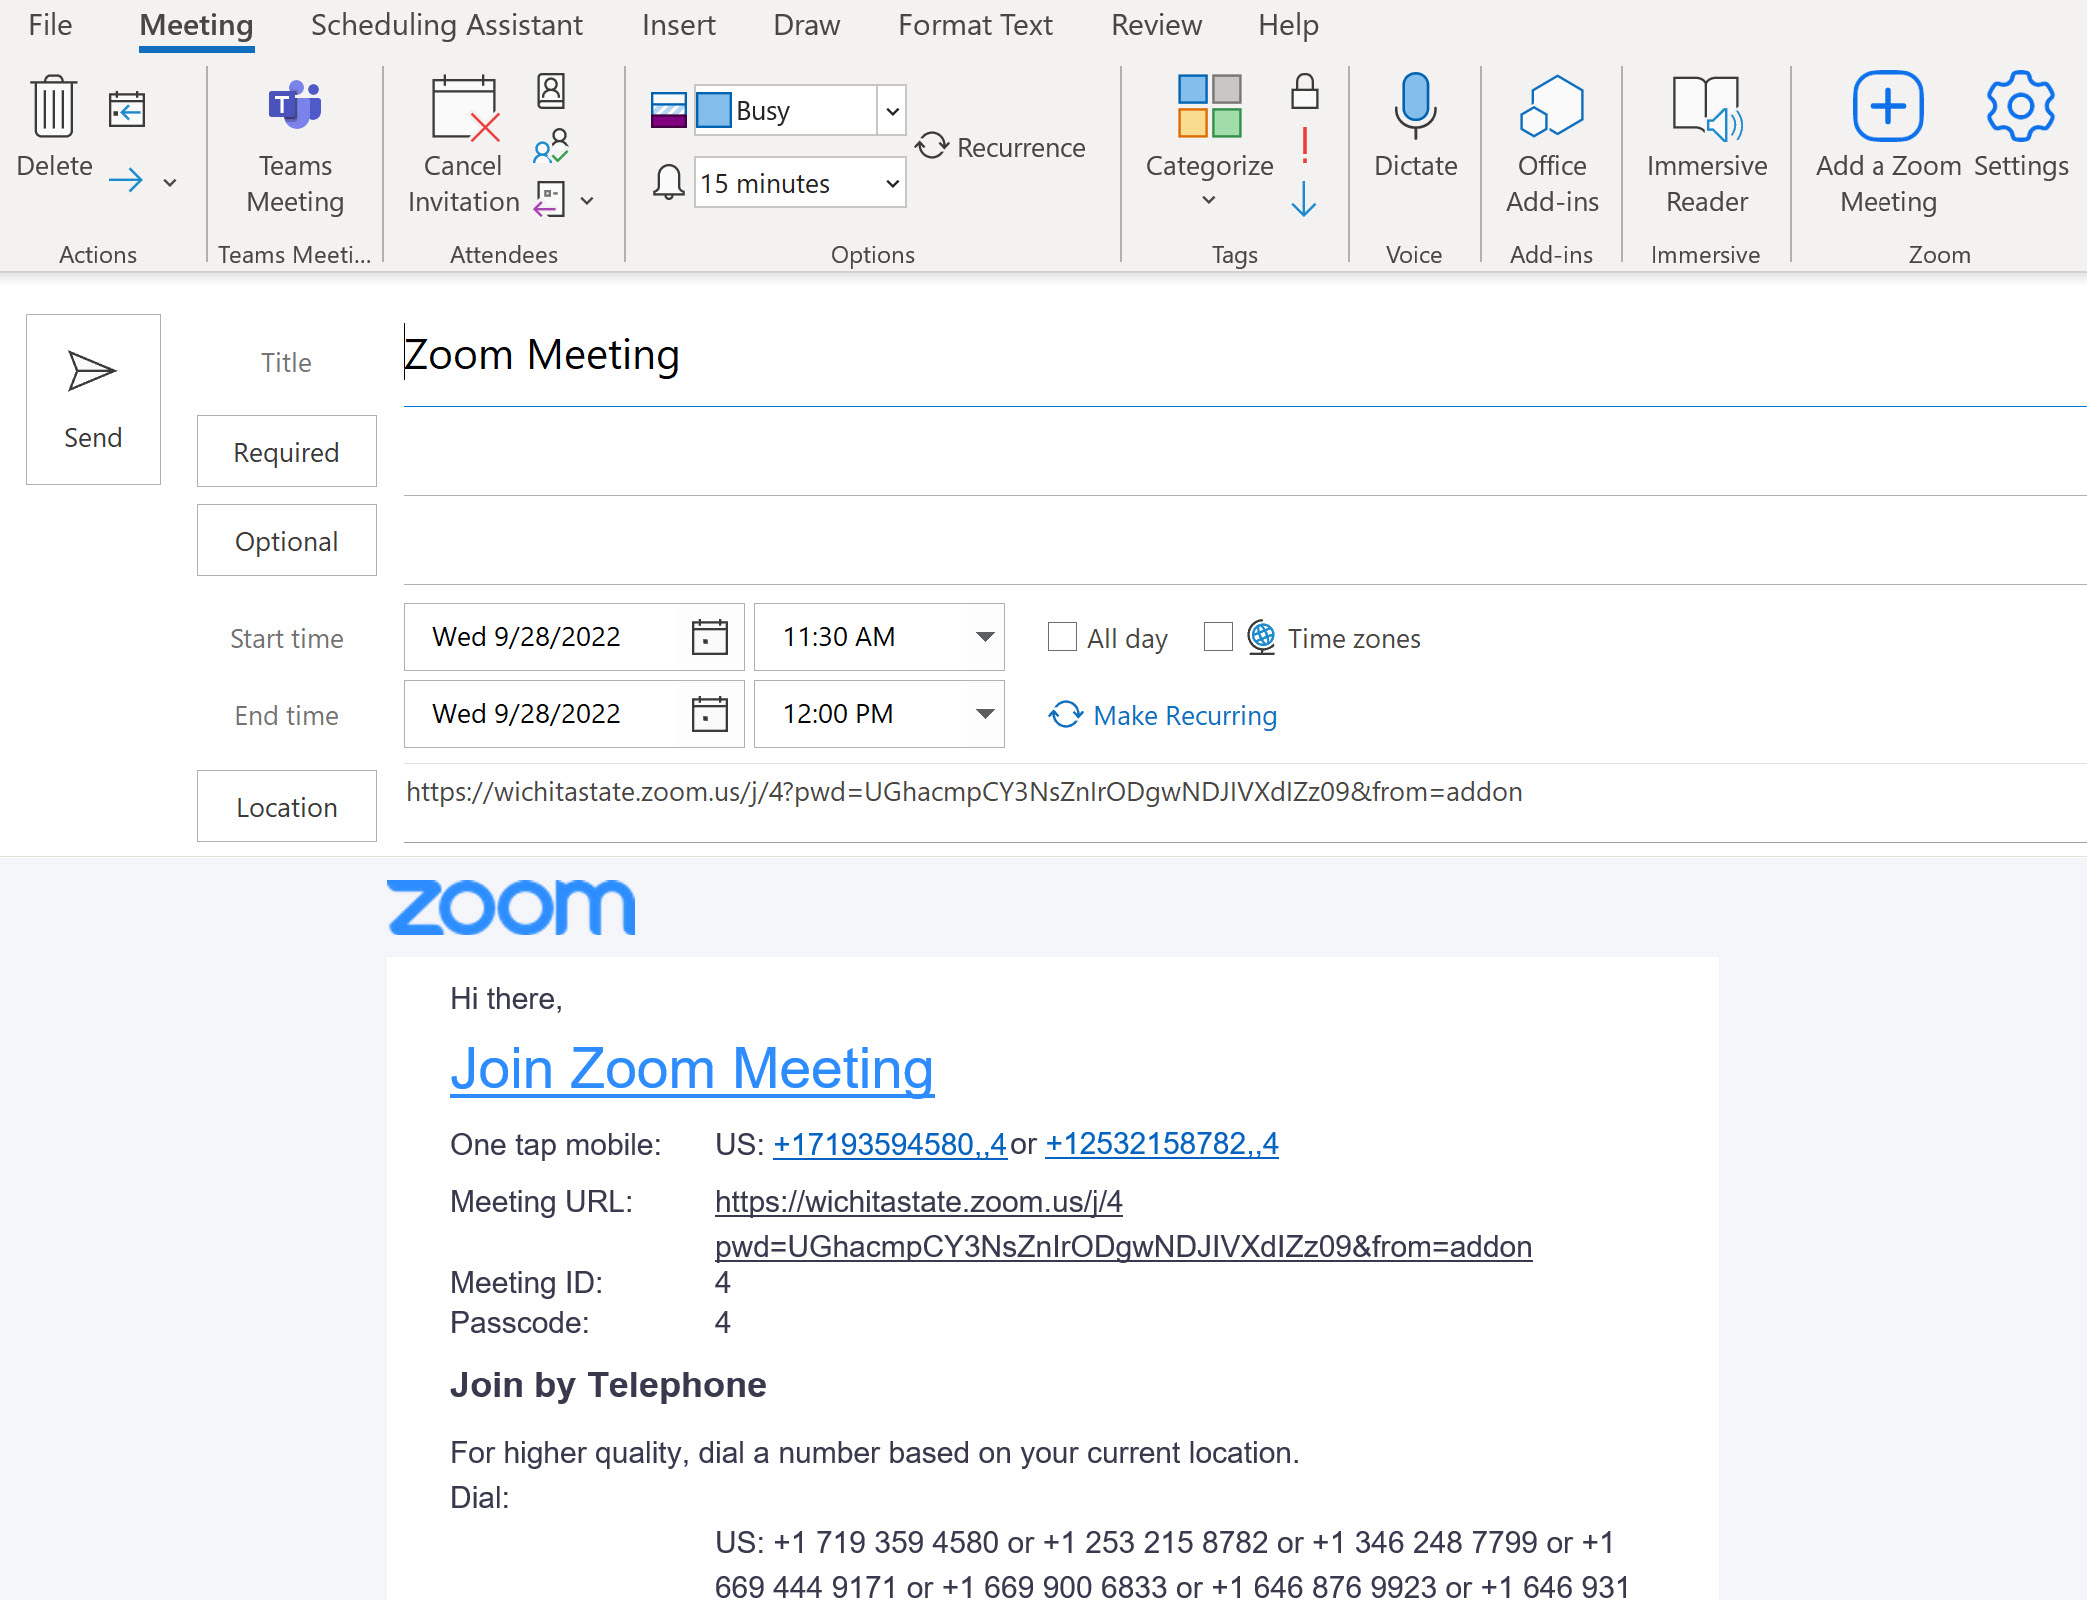 Zoom meeting information is located in the body of the Outlook meeting invite